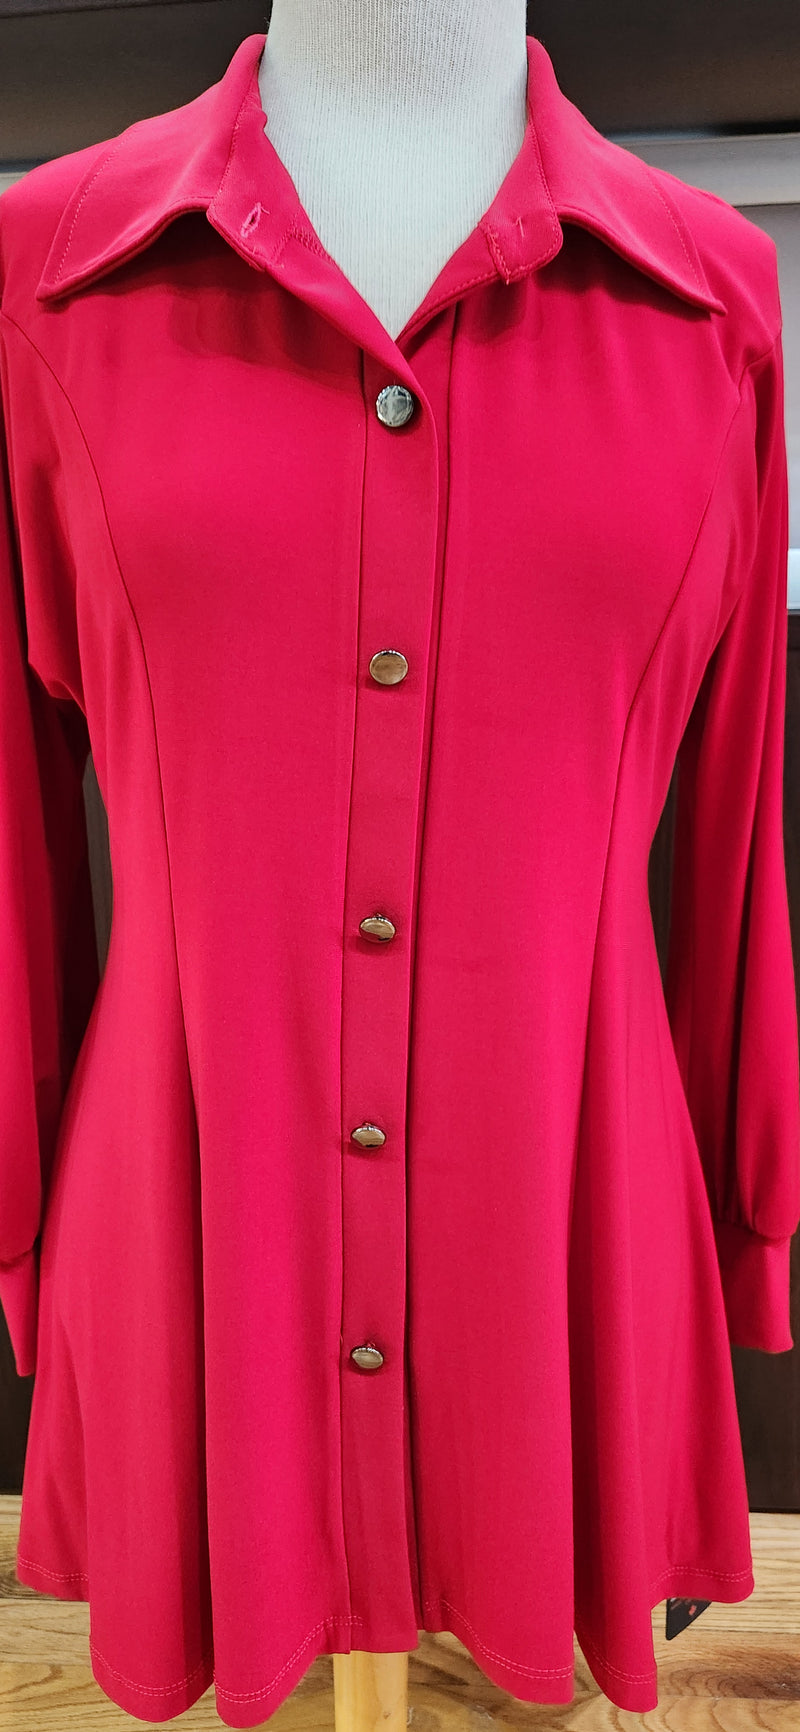 Artex red blouse